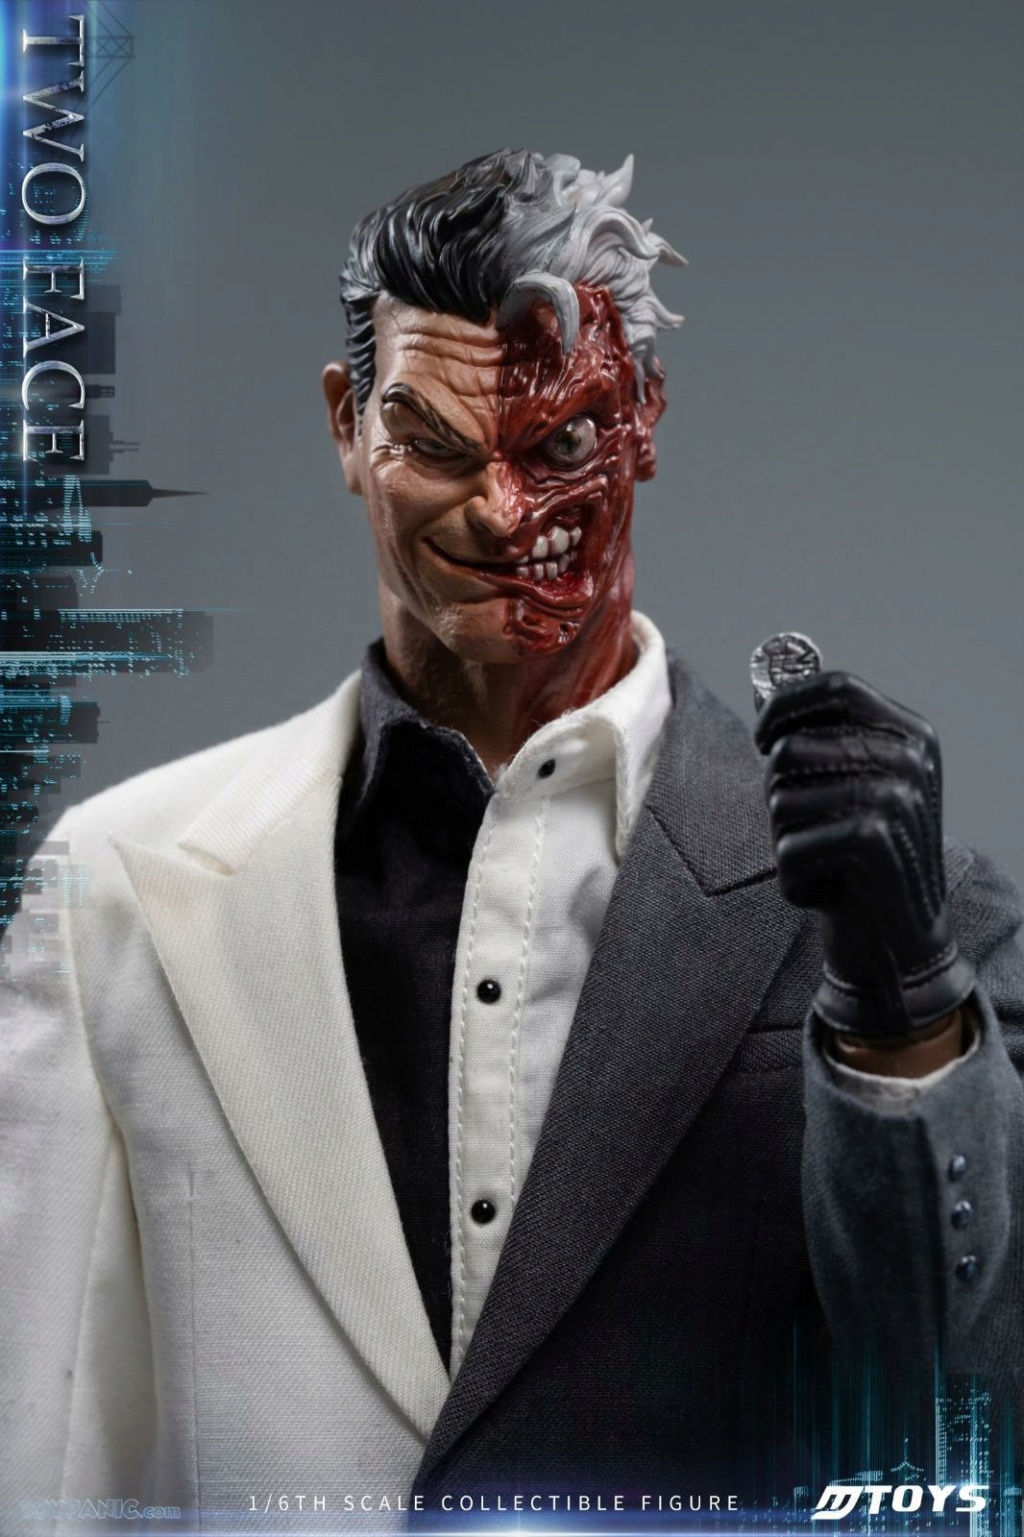 MToys - NEW PRODUCT: Mtoys MS013 1/6 Scale Two Face figure 4430